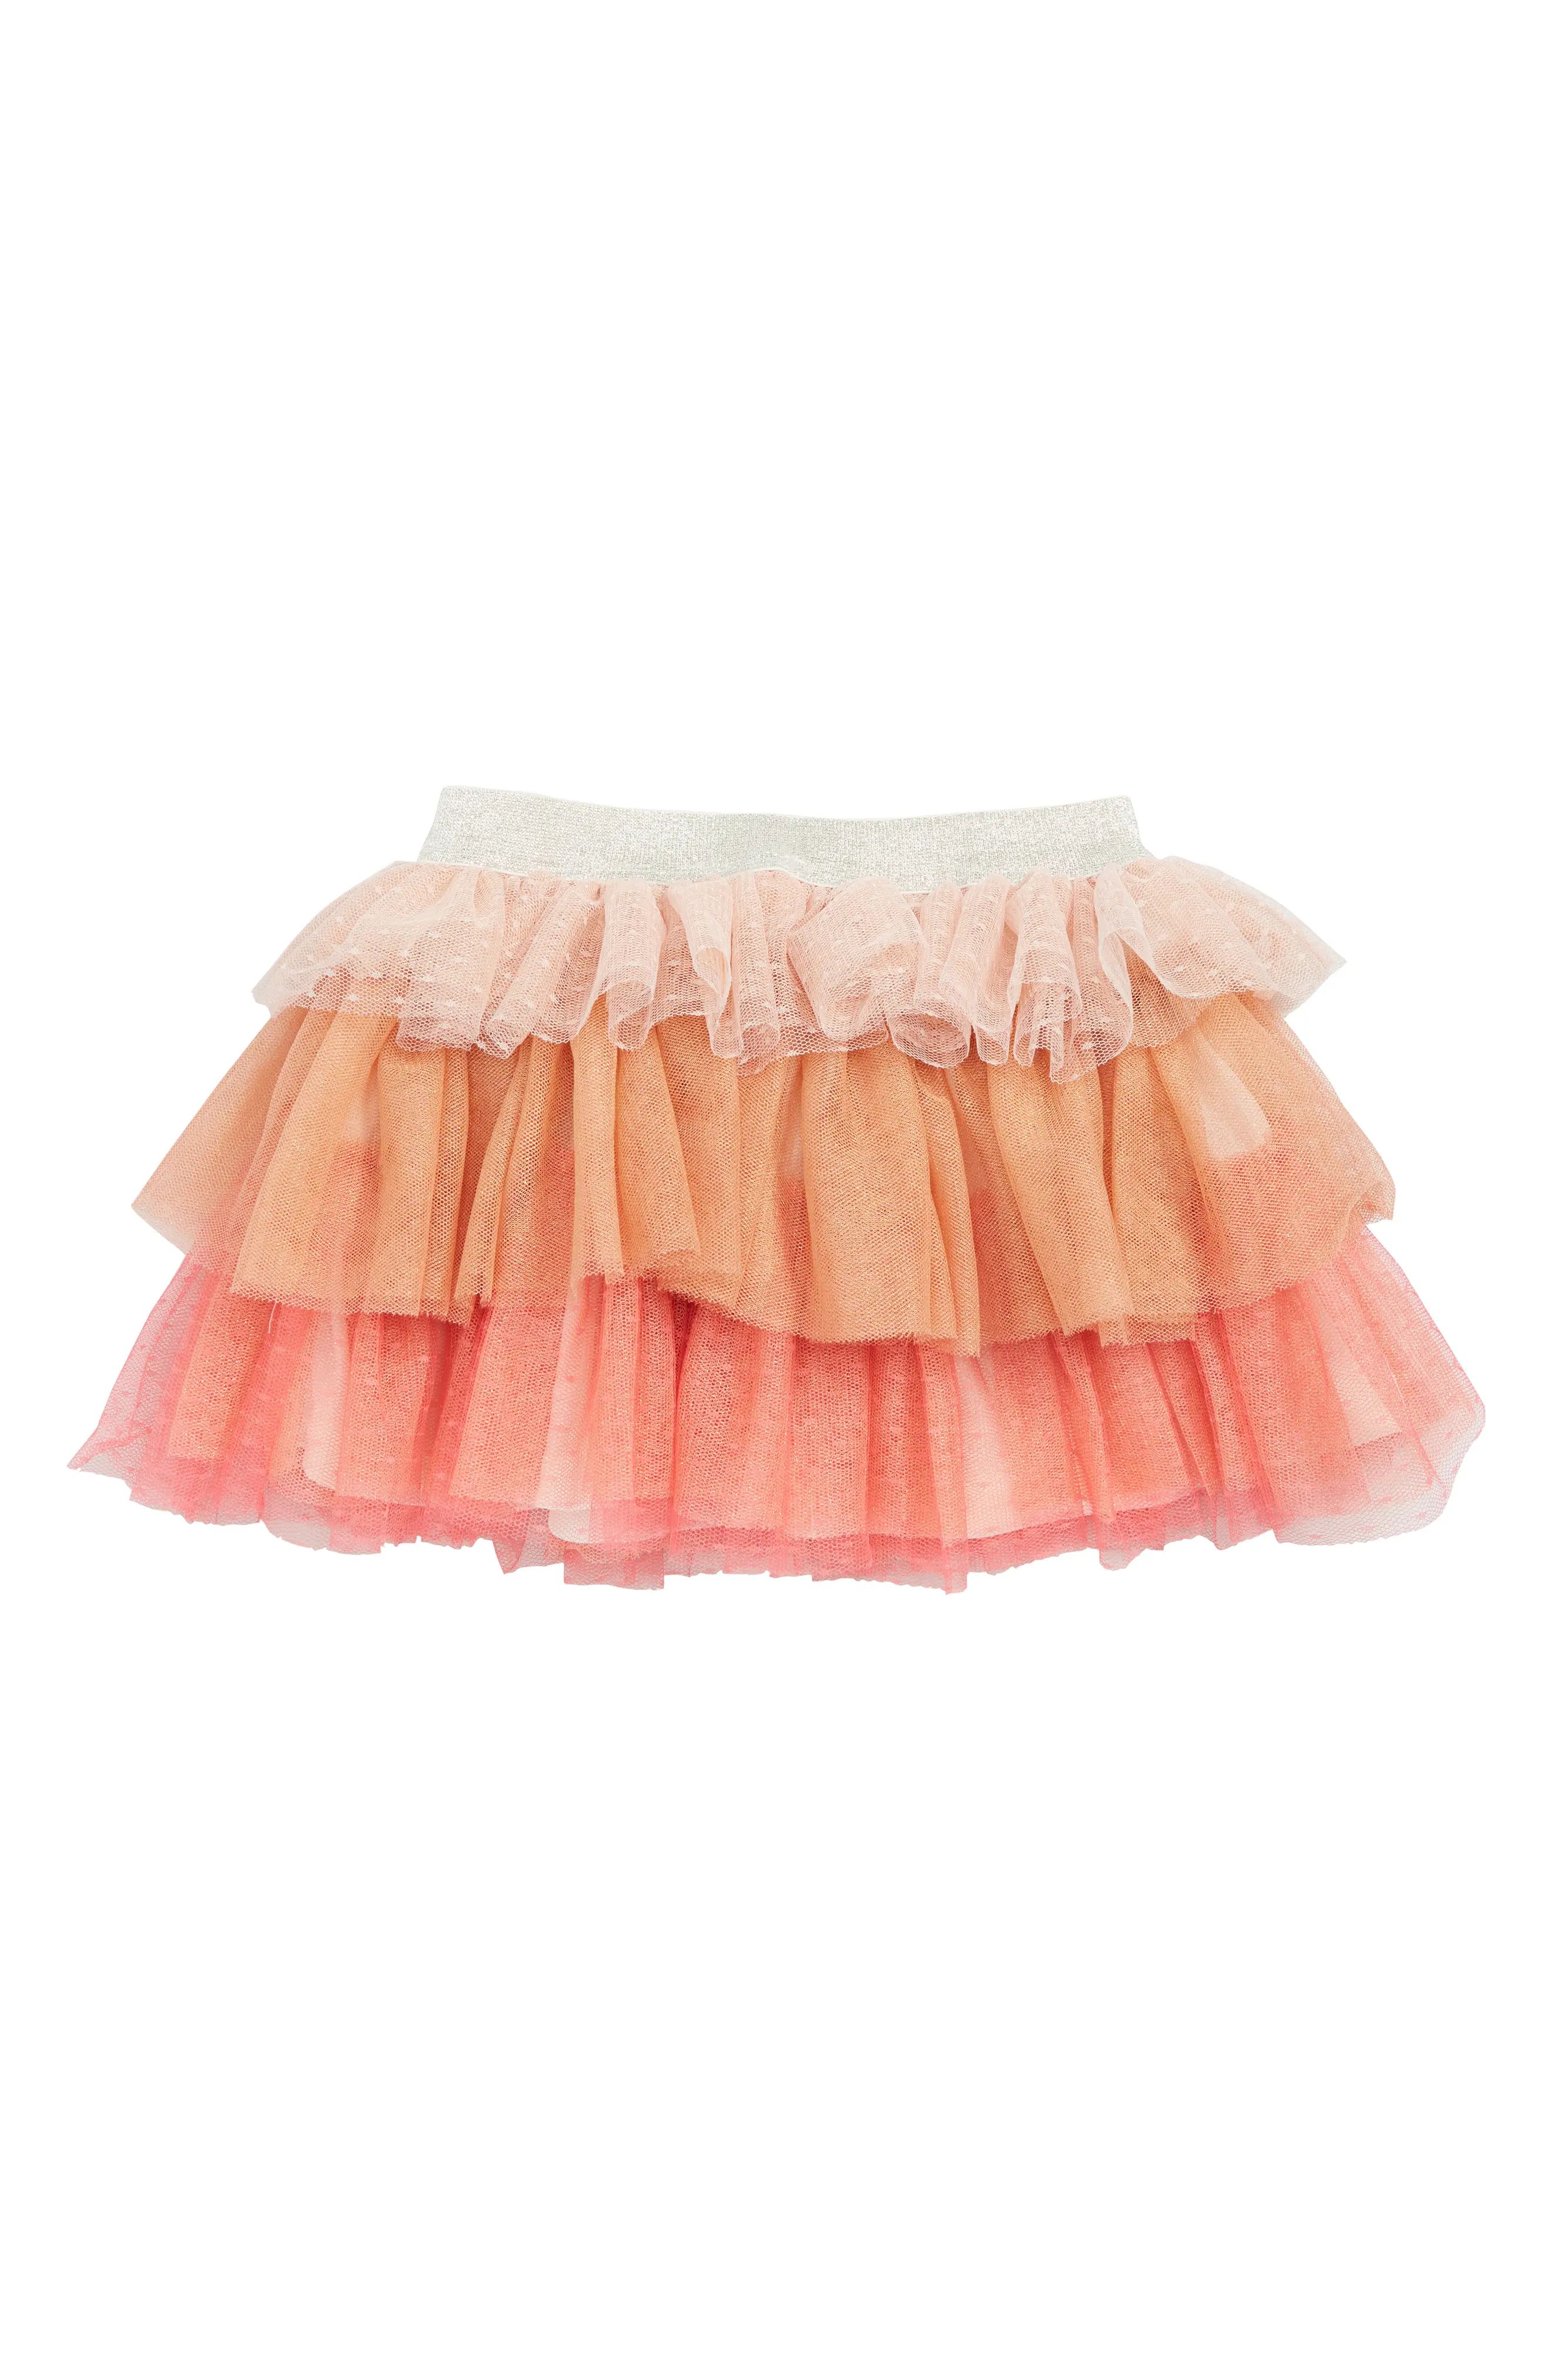 Toddler Girl's Truly Me Triple Tiered Tutu Skirt, Size 3T - Orange | Nordstrom